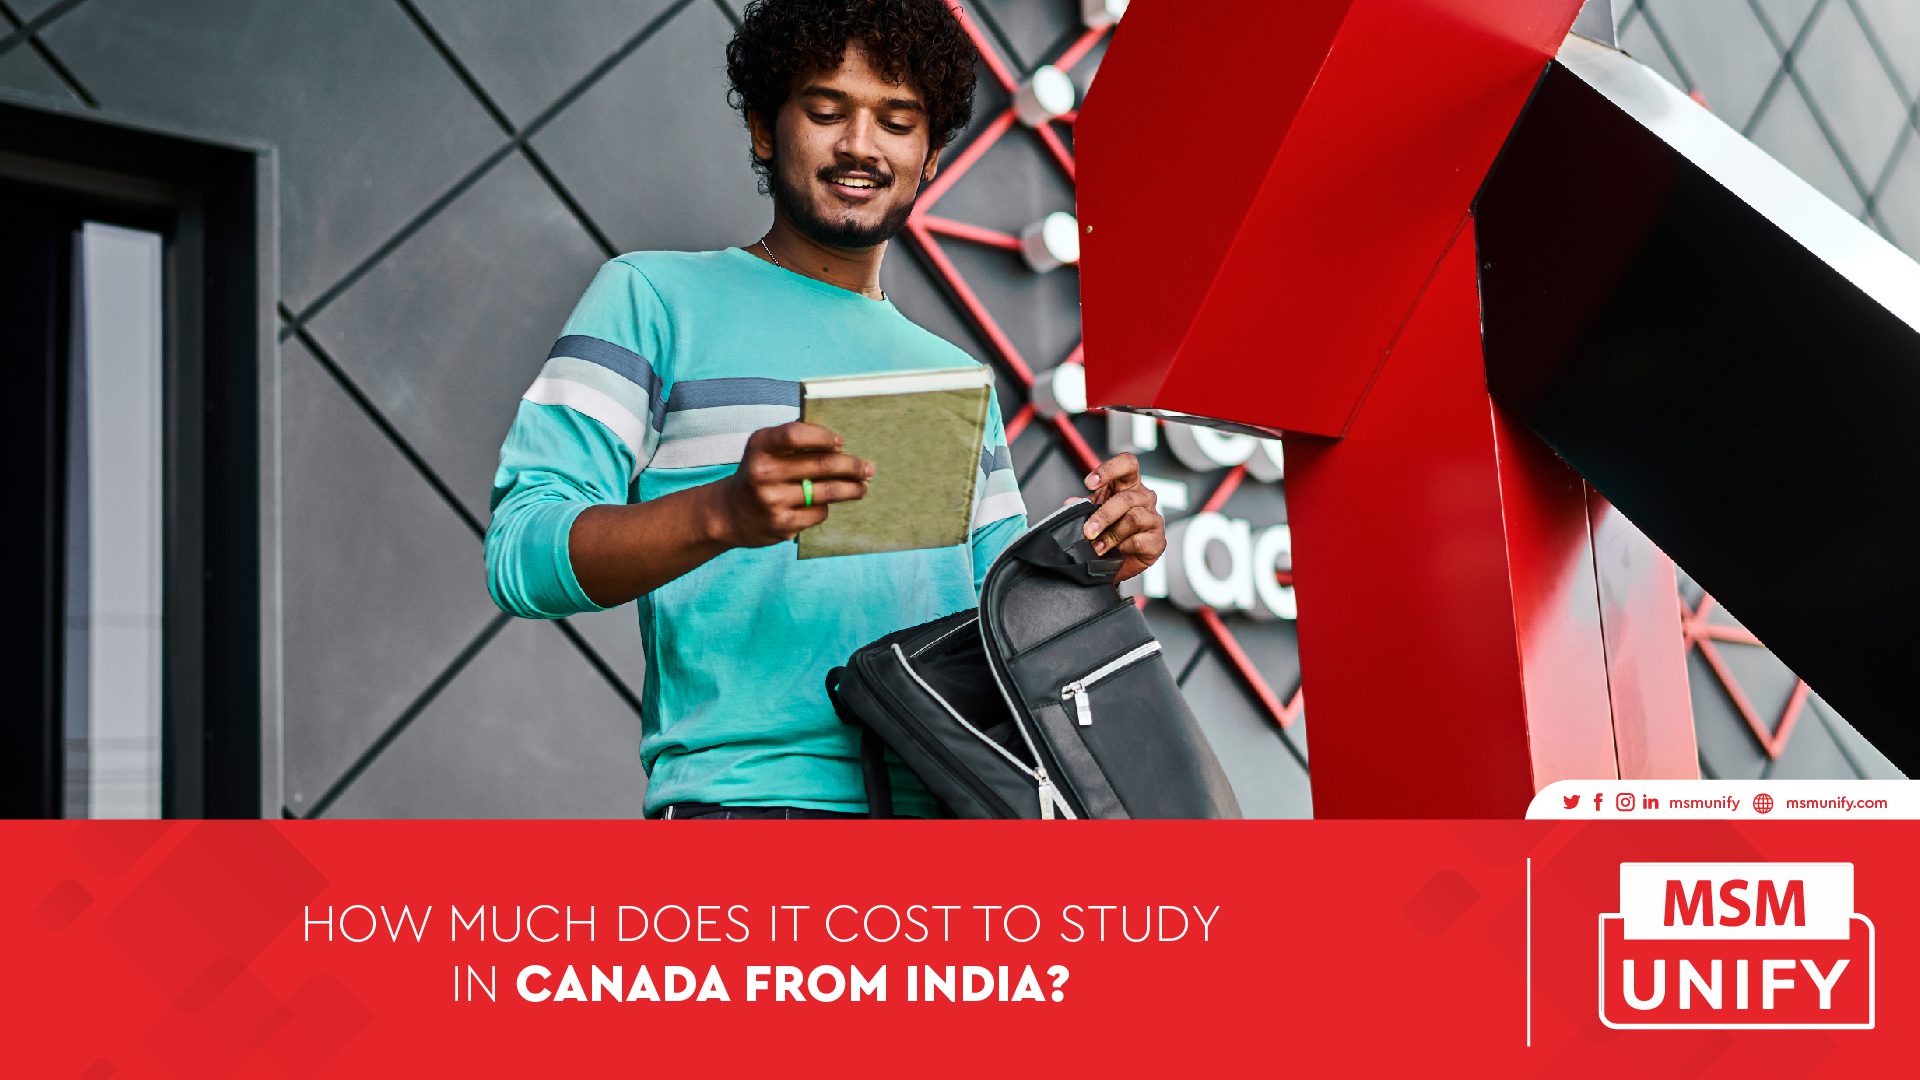 111622 MSM Unify How Much Does it Cost to Study in Canada from India 01